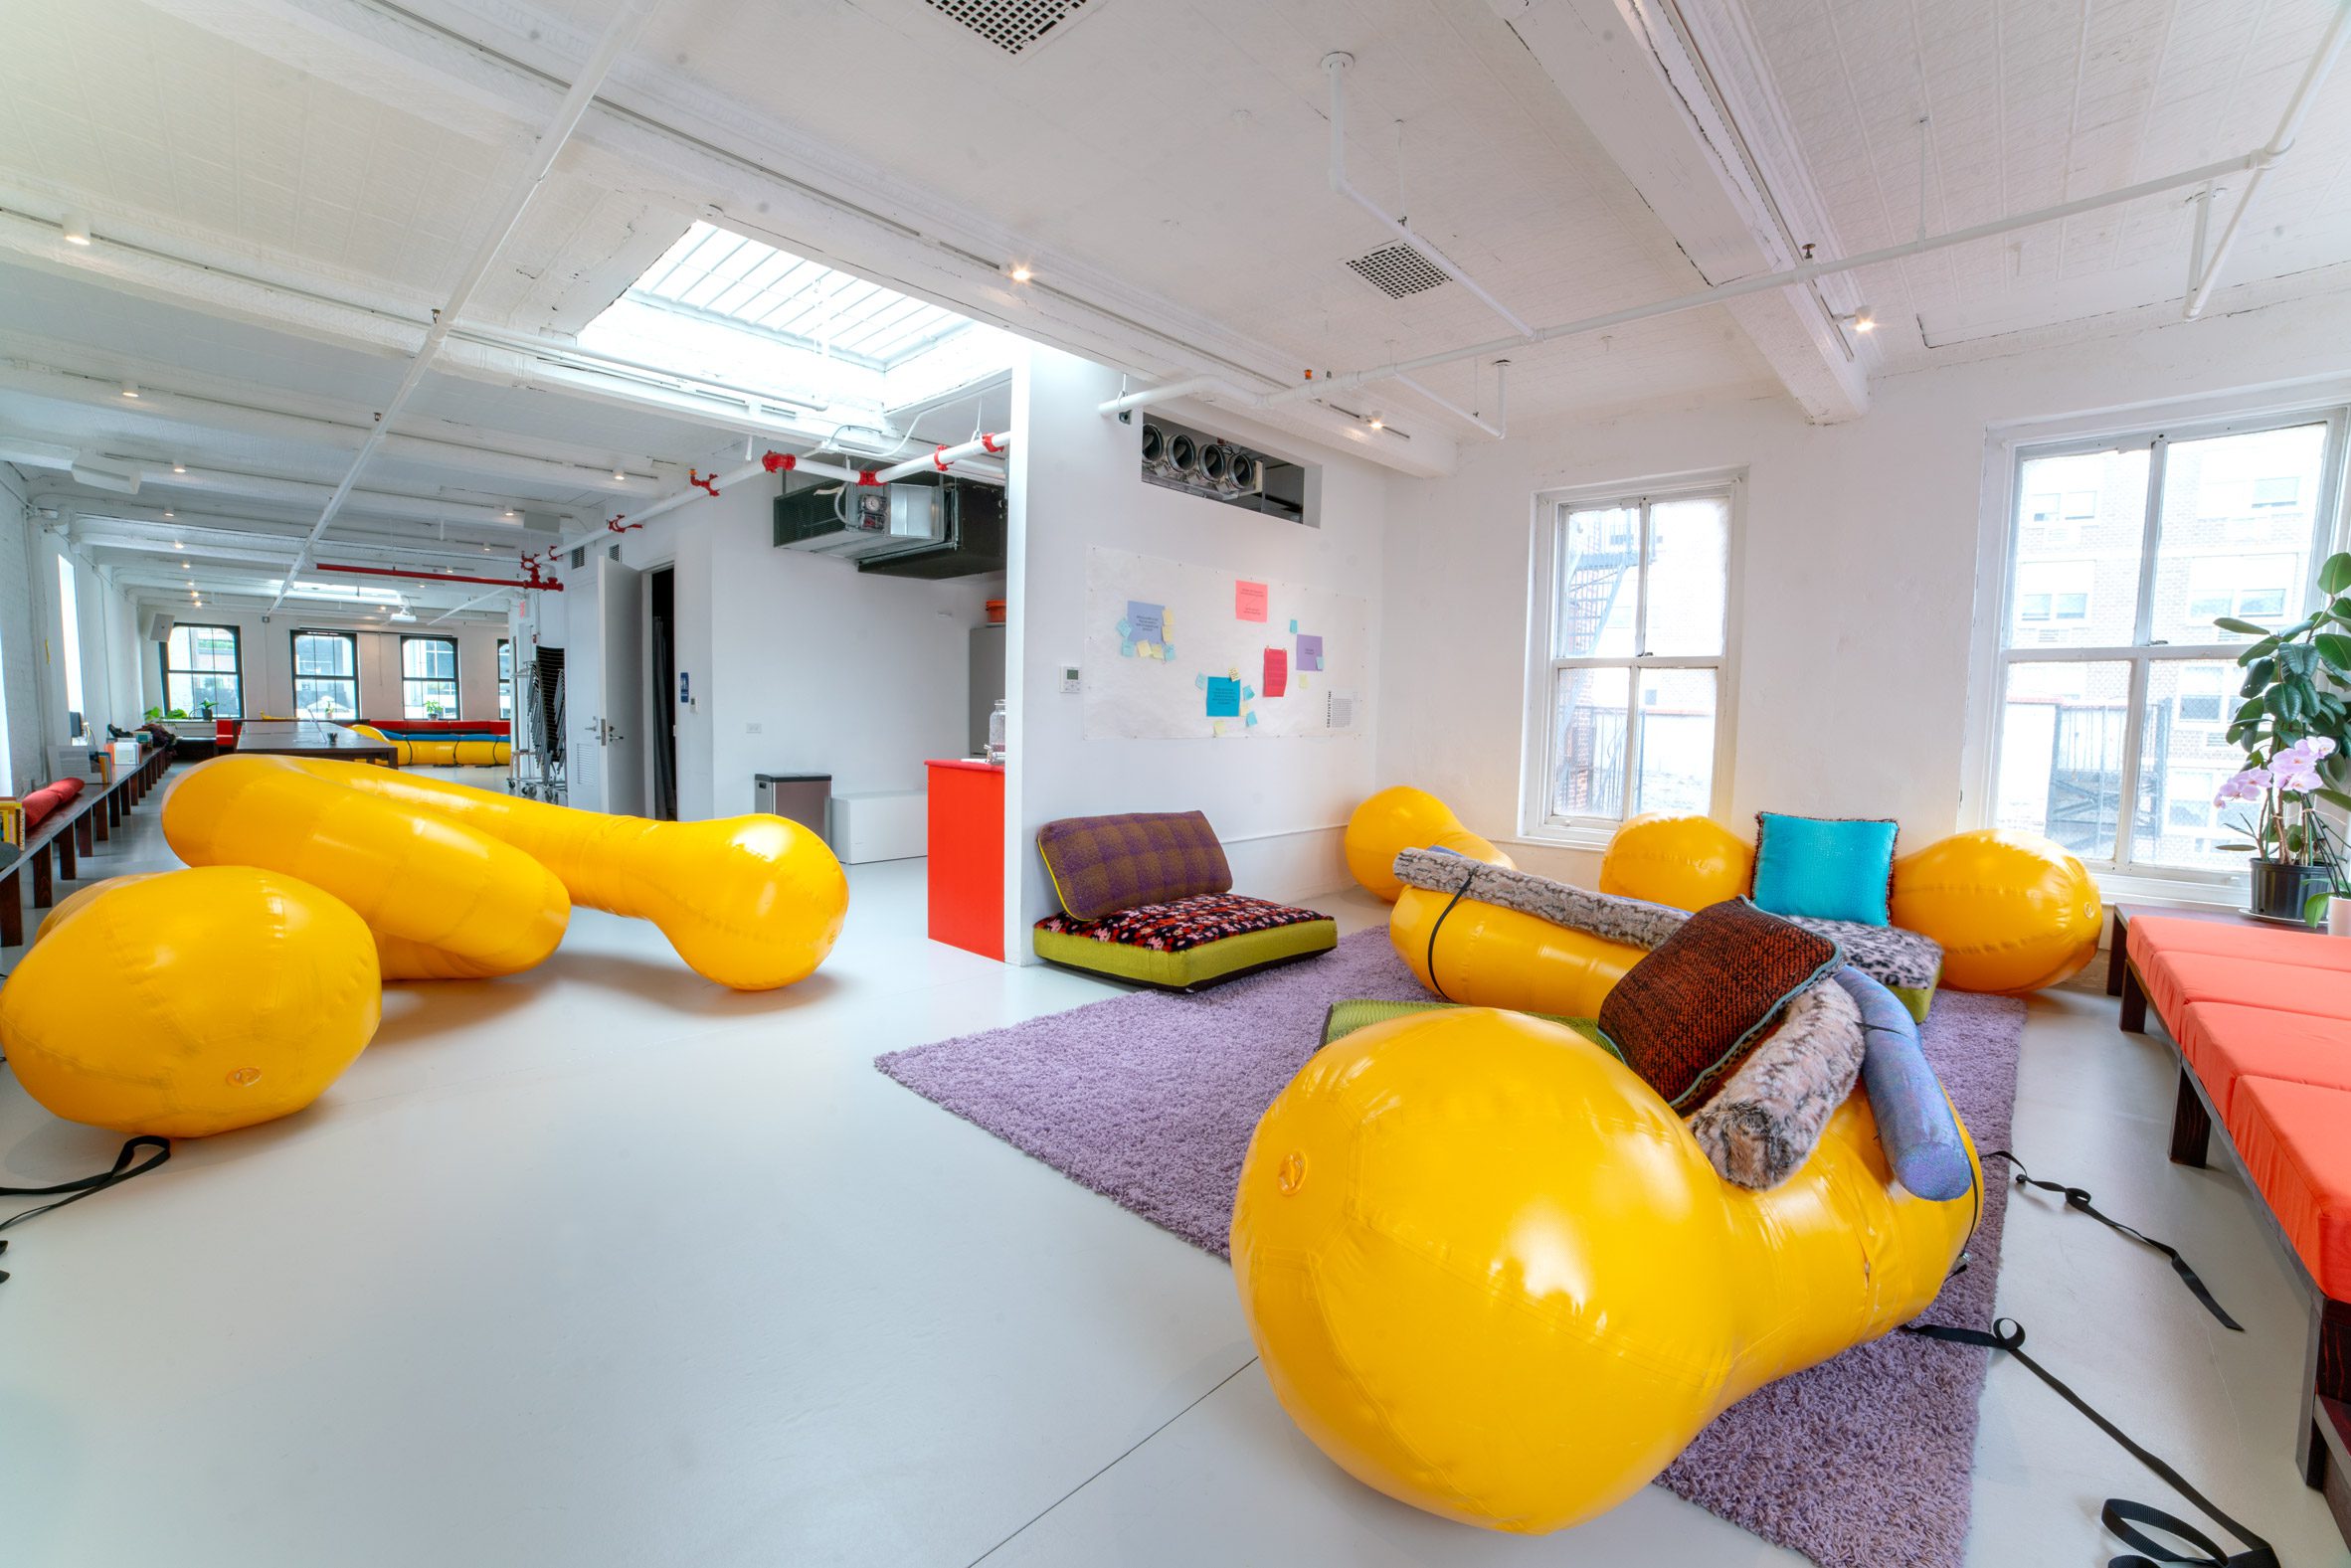 Yellow inflatable seating in room